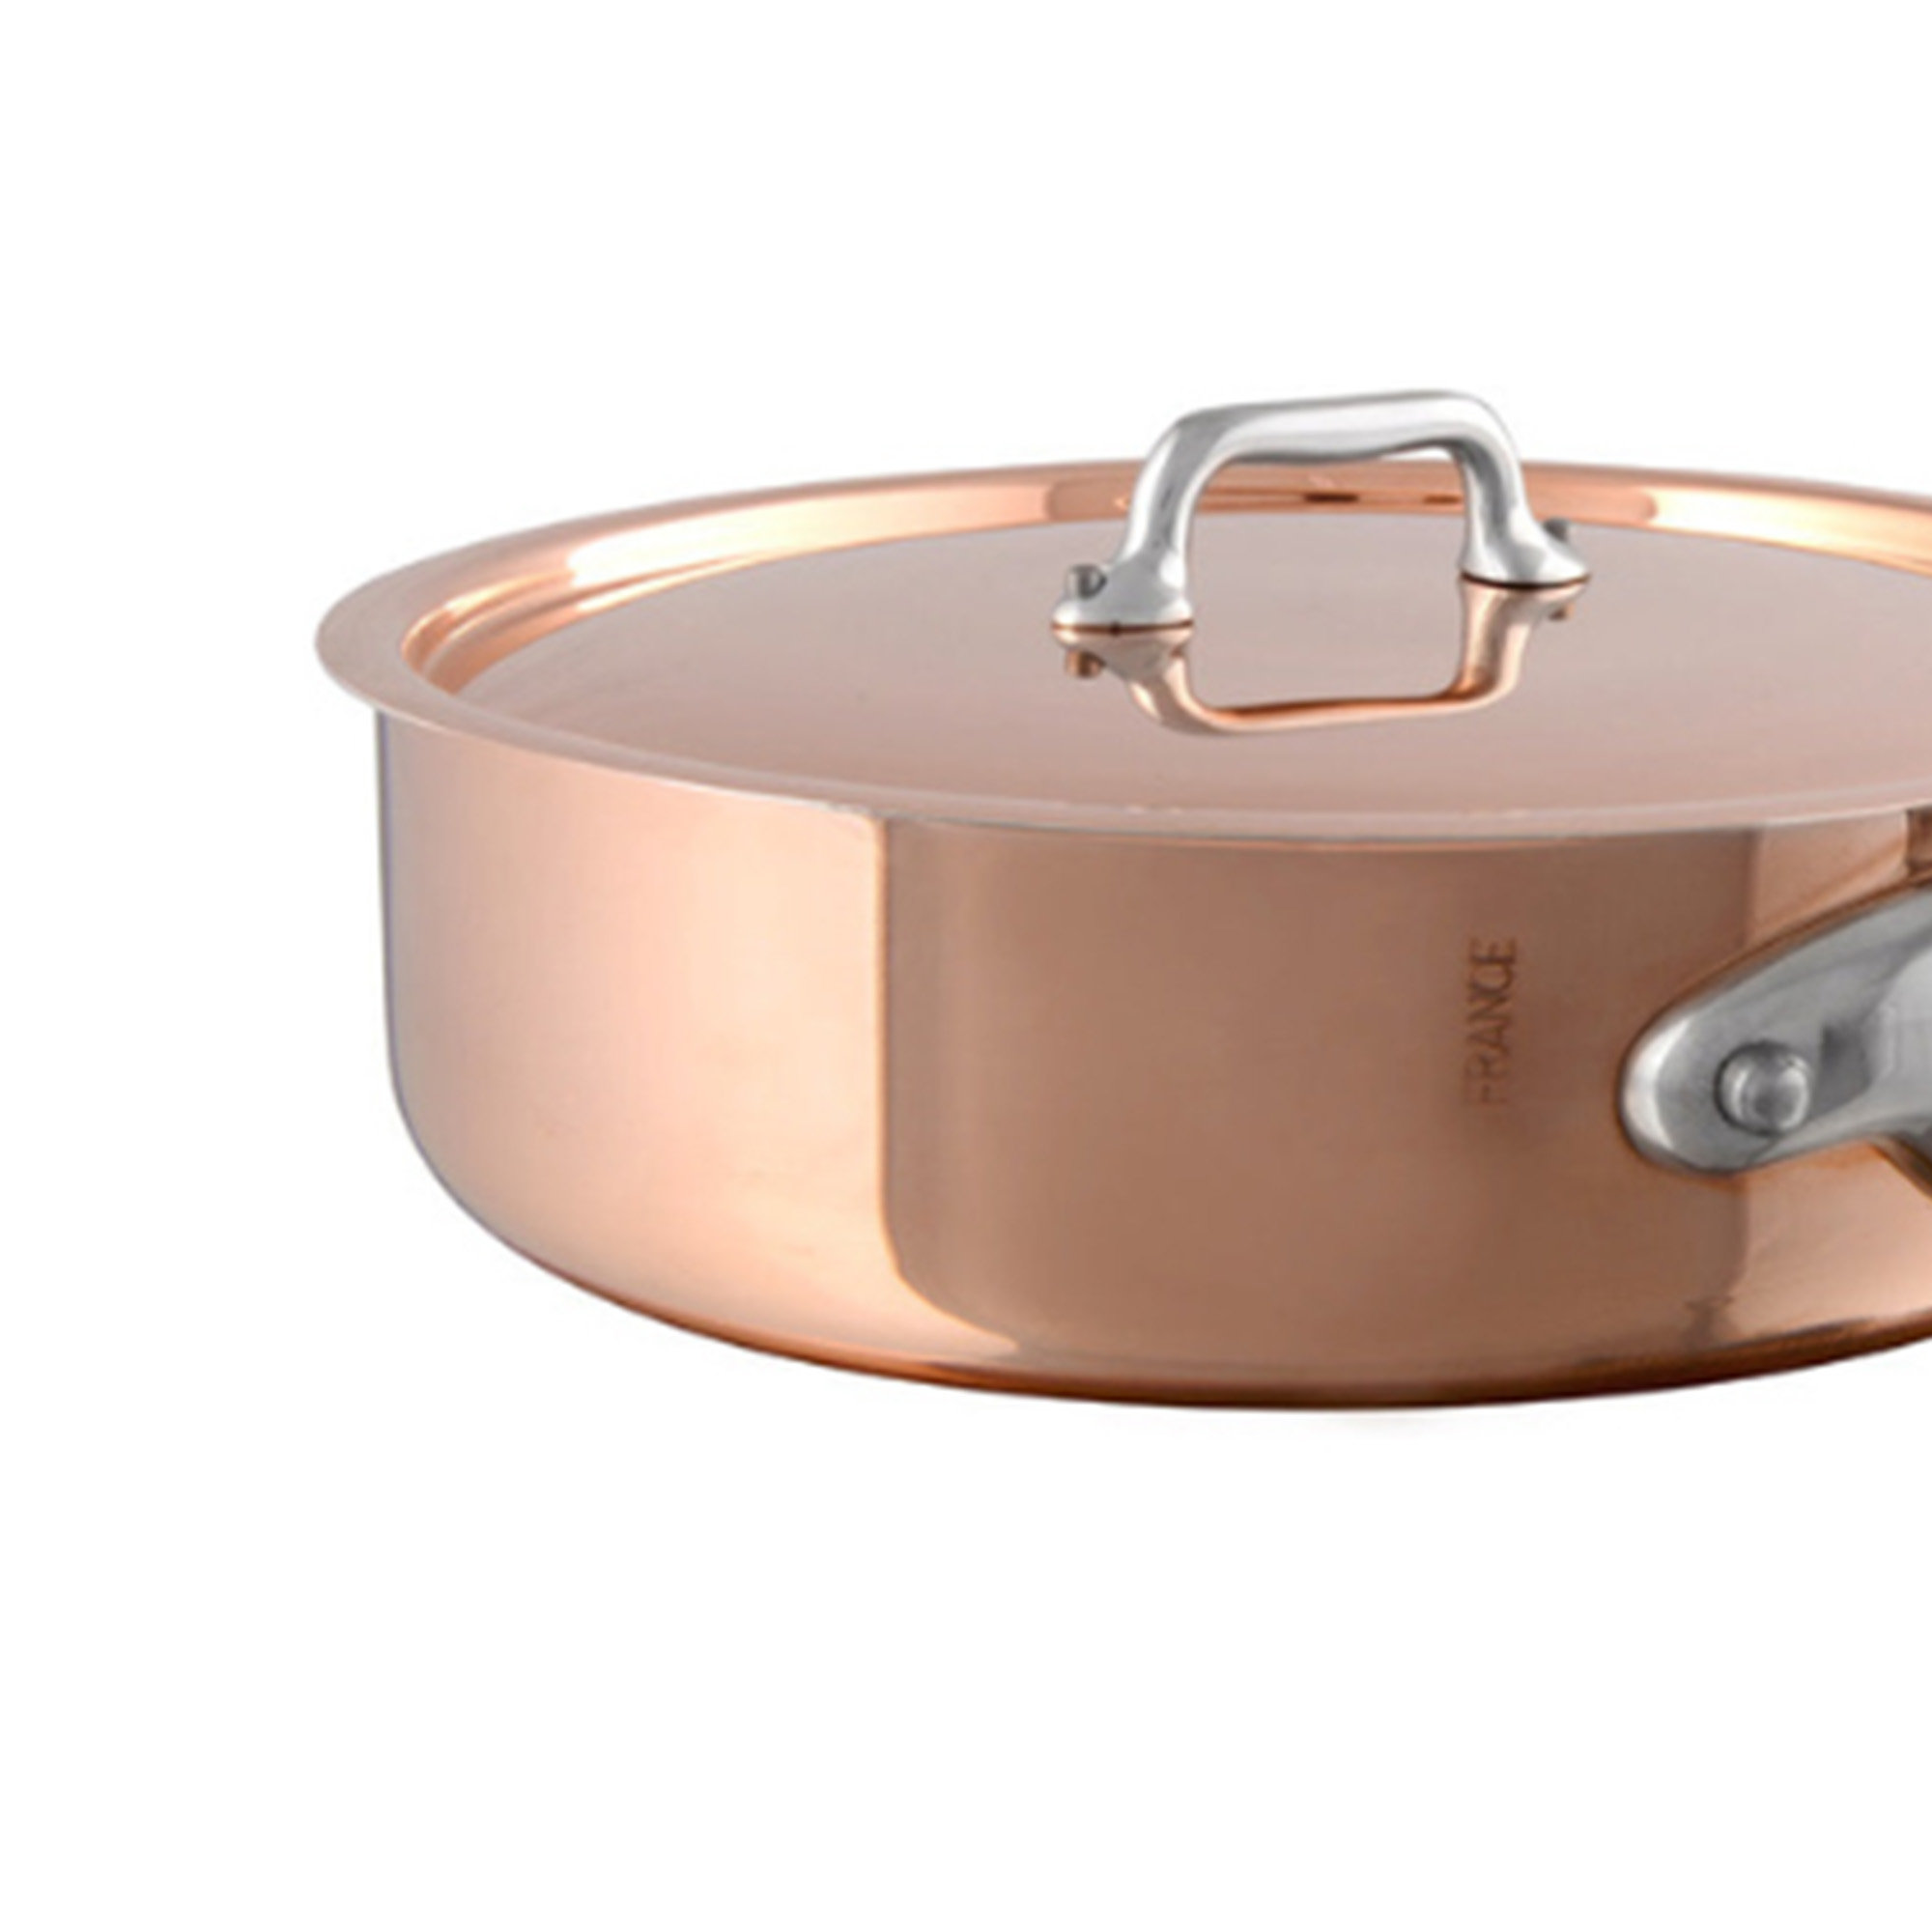 Mauviel M'TRIPLY S Polished Copper & Stainless Steel Sauce Pan